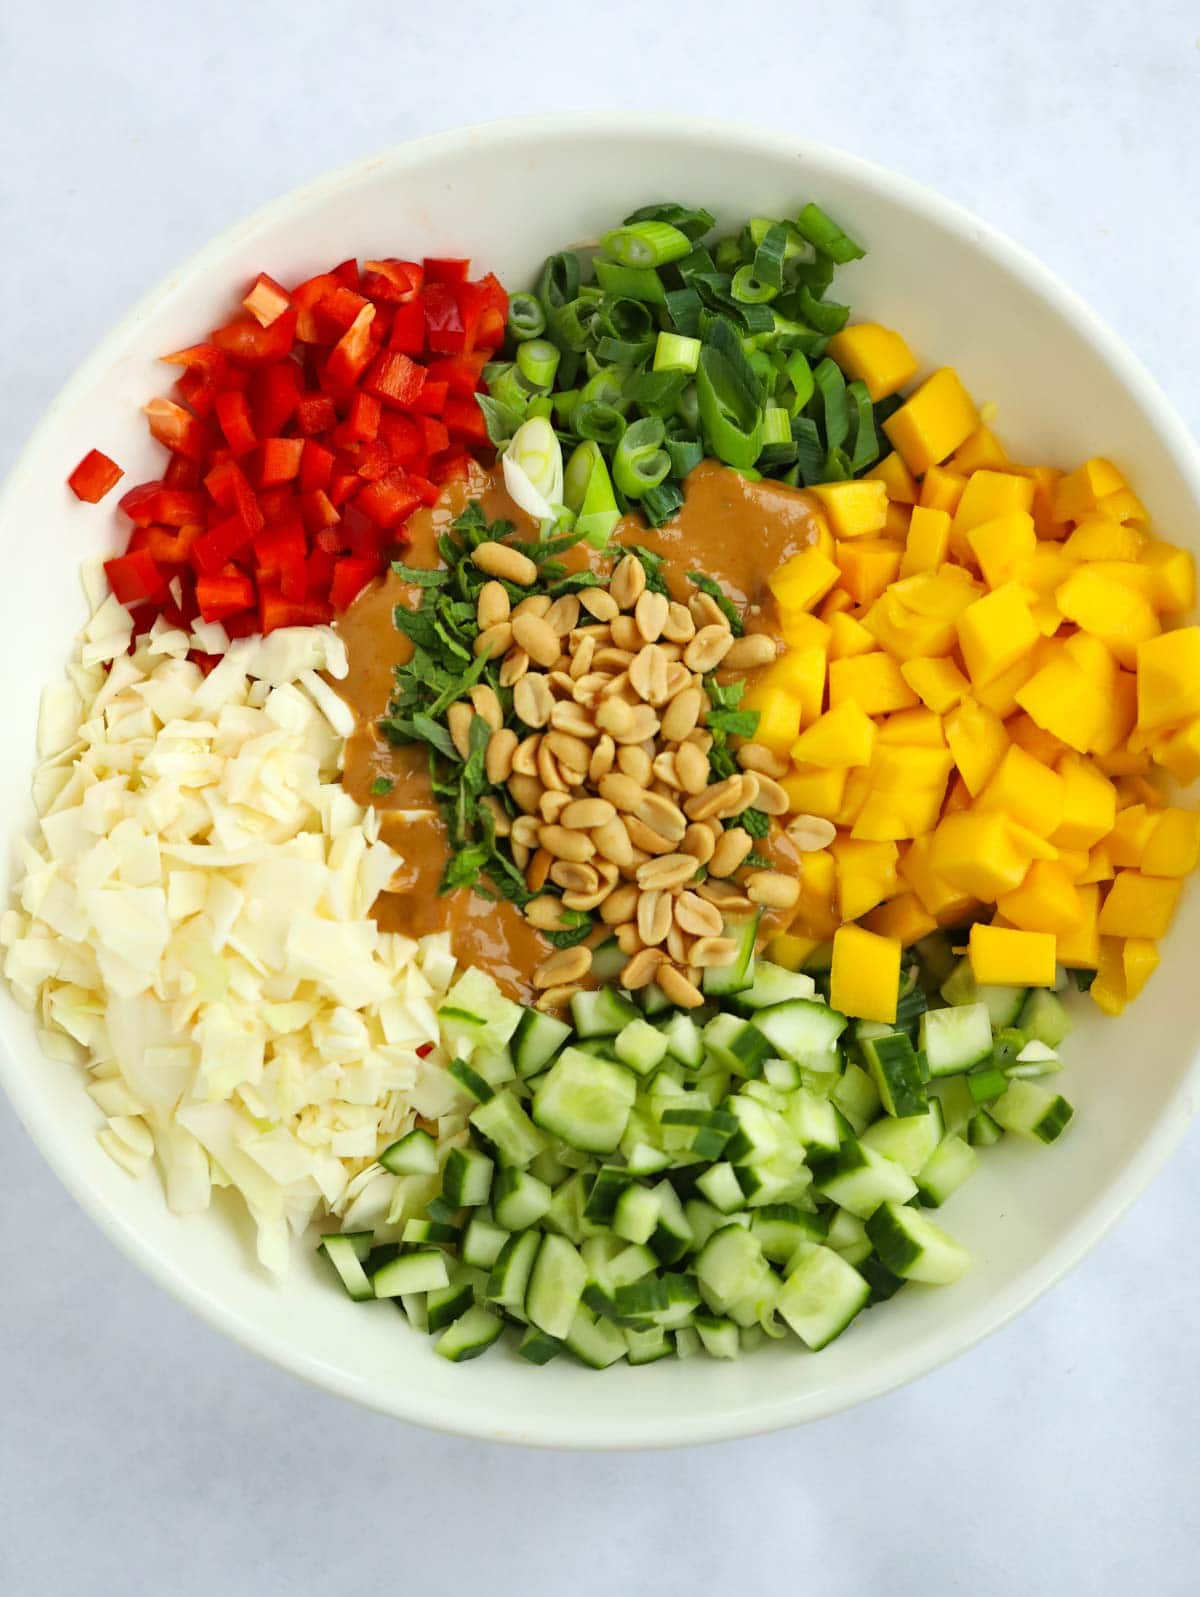 Ingredients for a Thai-style salad with peanut butter salad dressing